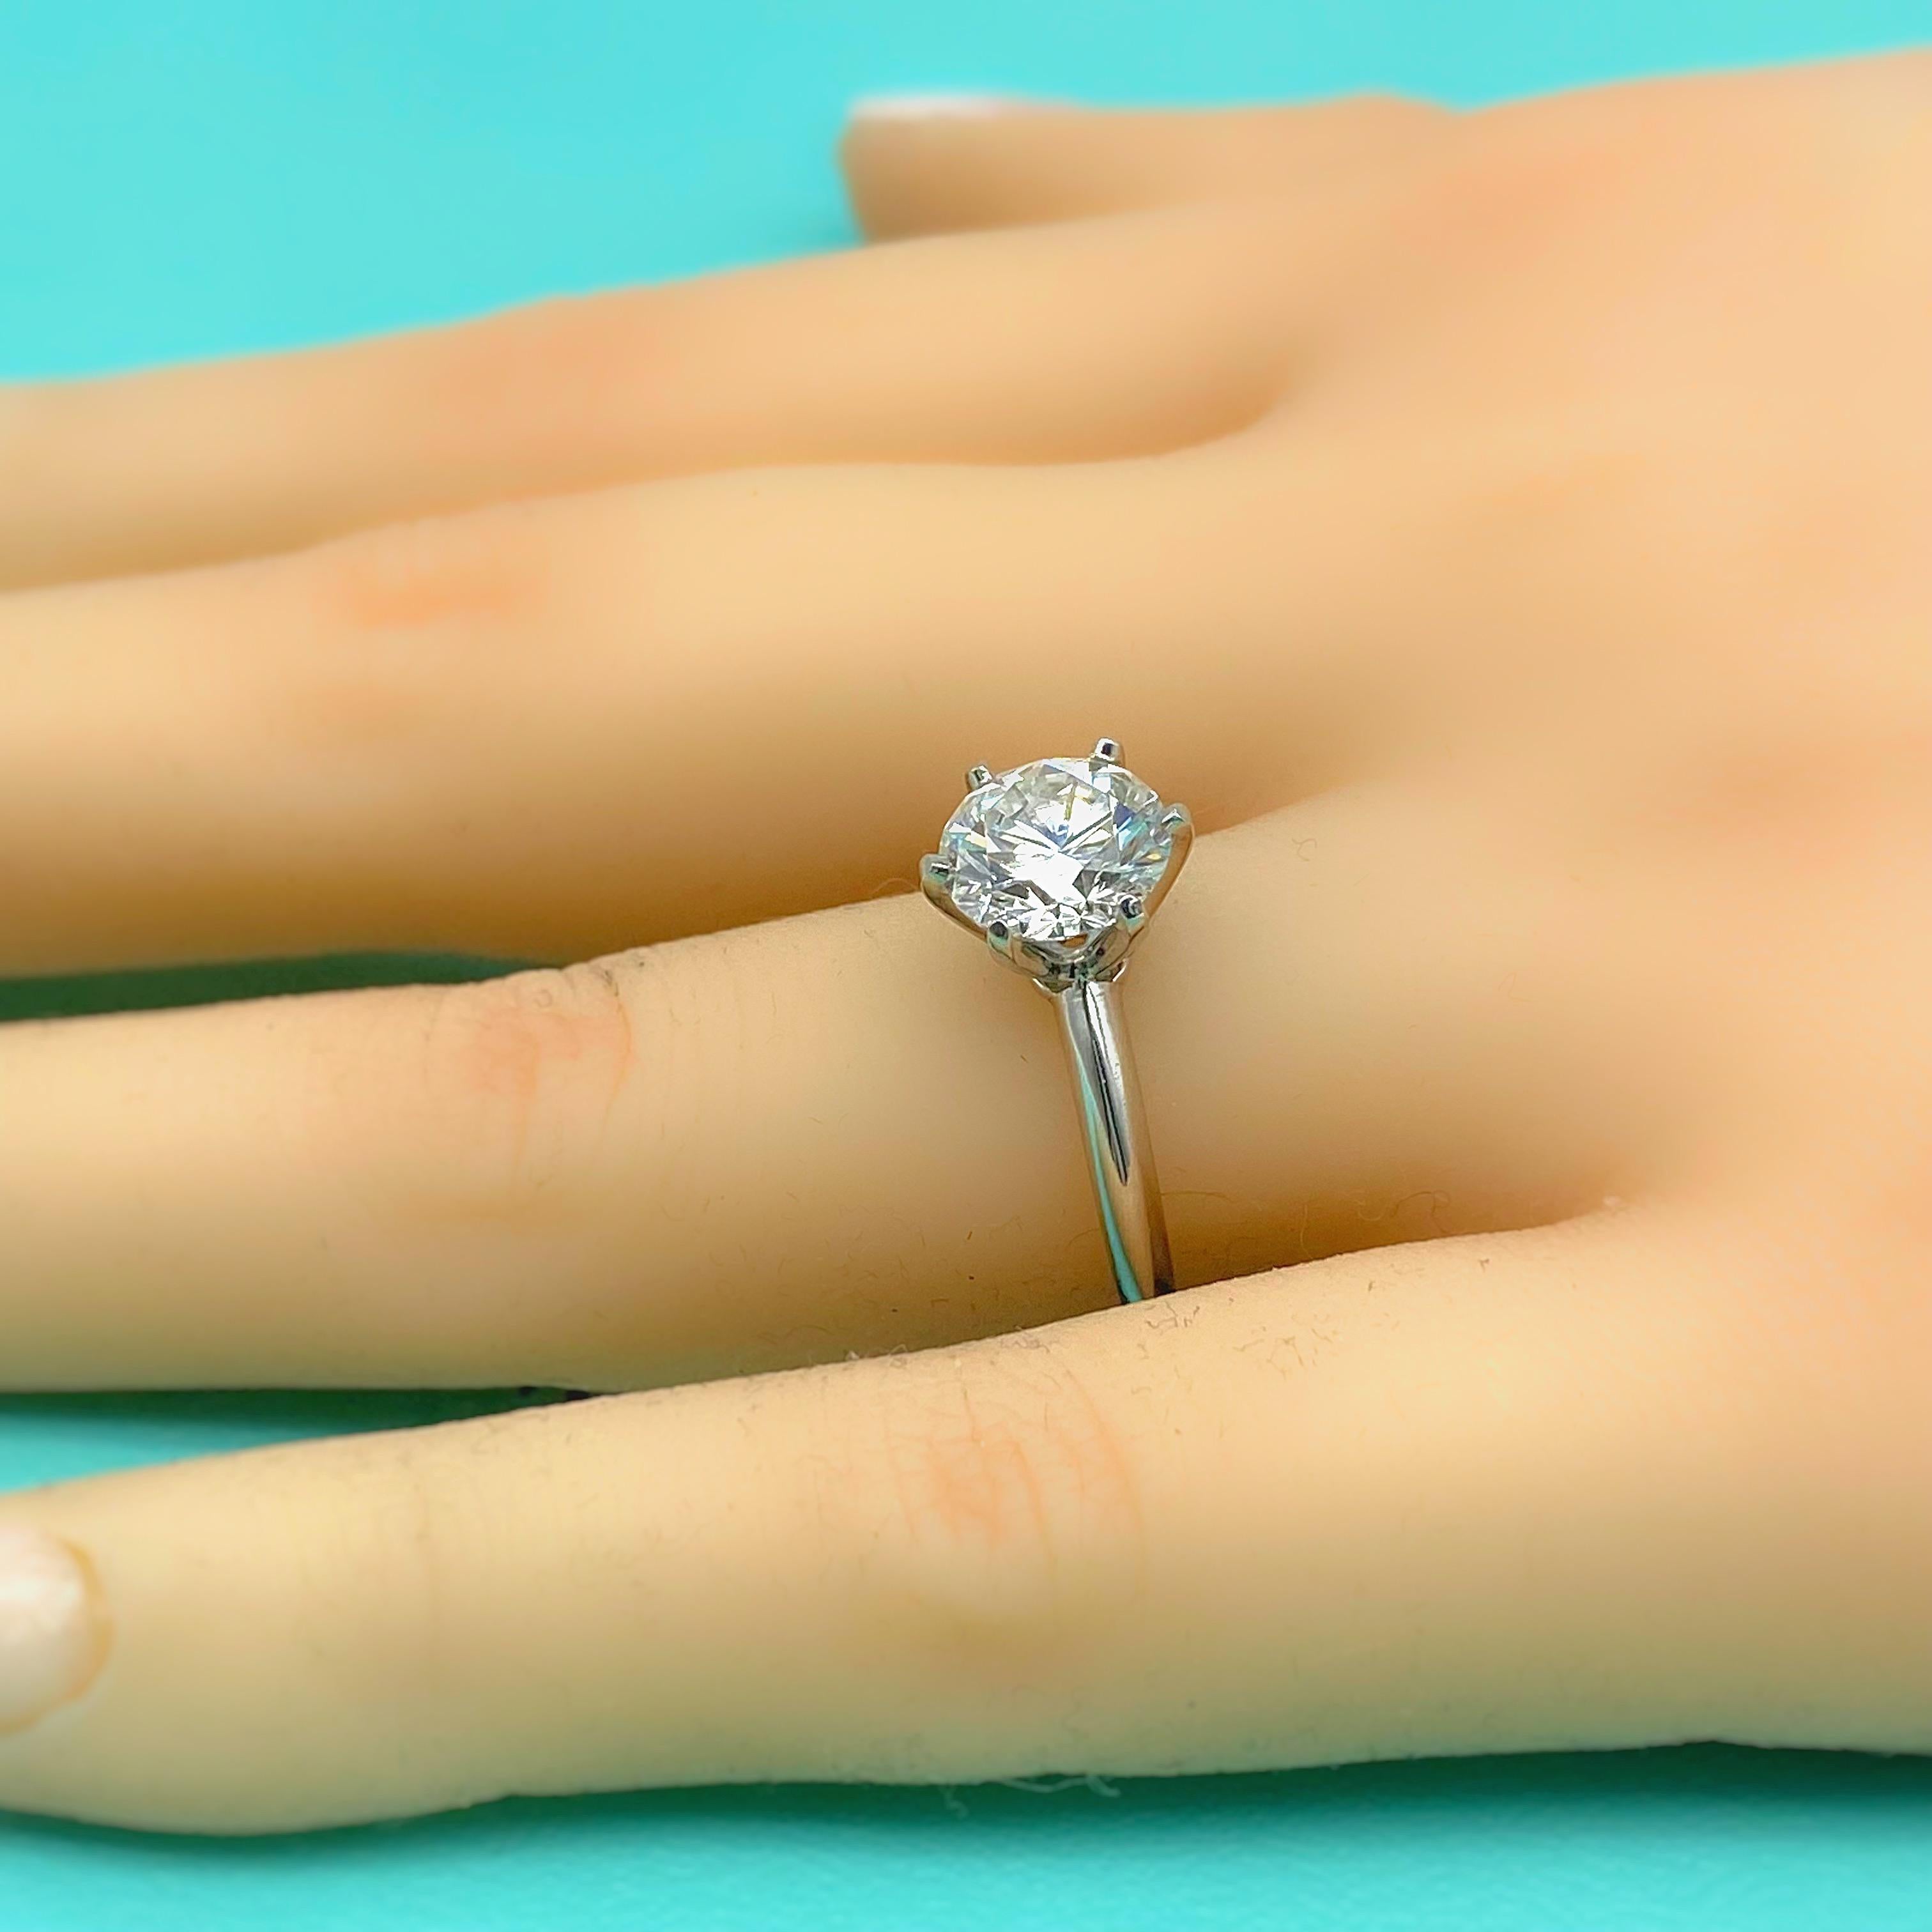 Tiffany & Co Tiffany Setting Round Diamond 2.08 Cts F VVS2 Engagement Ring Plat For Sale 2